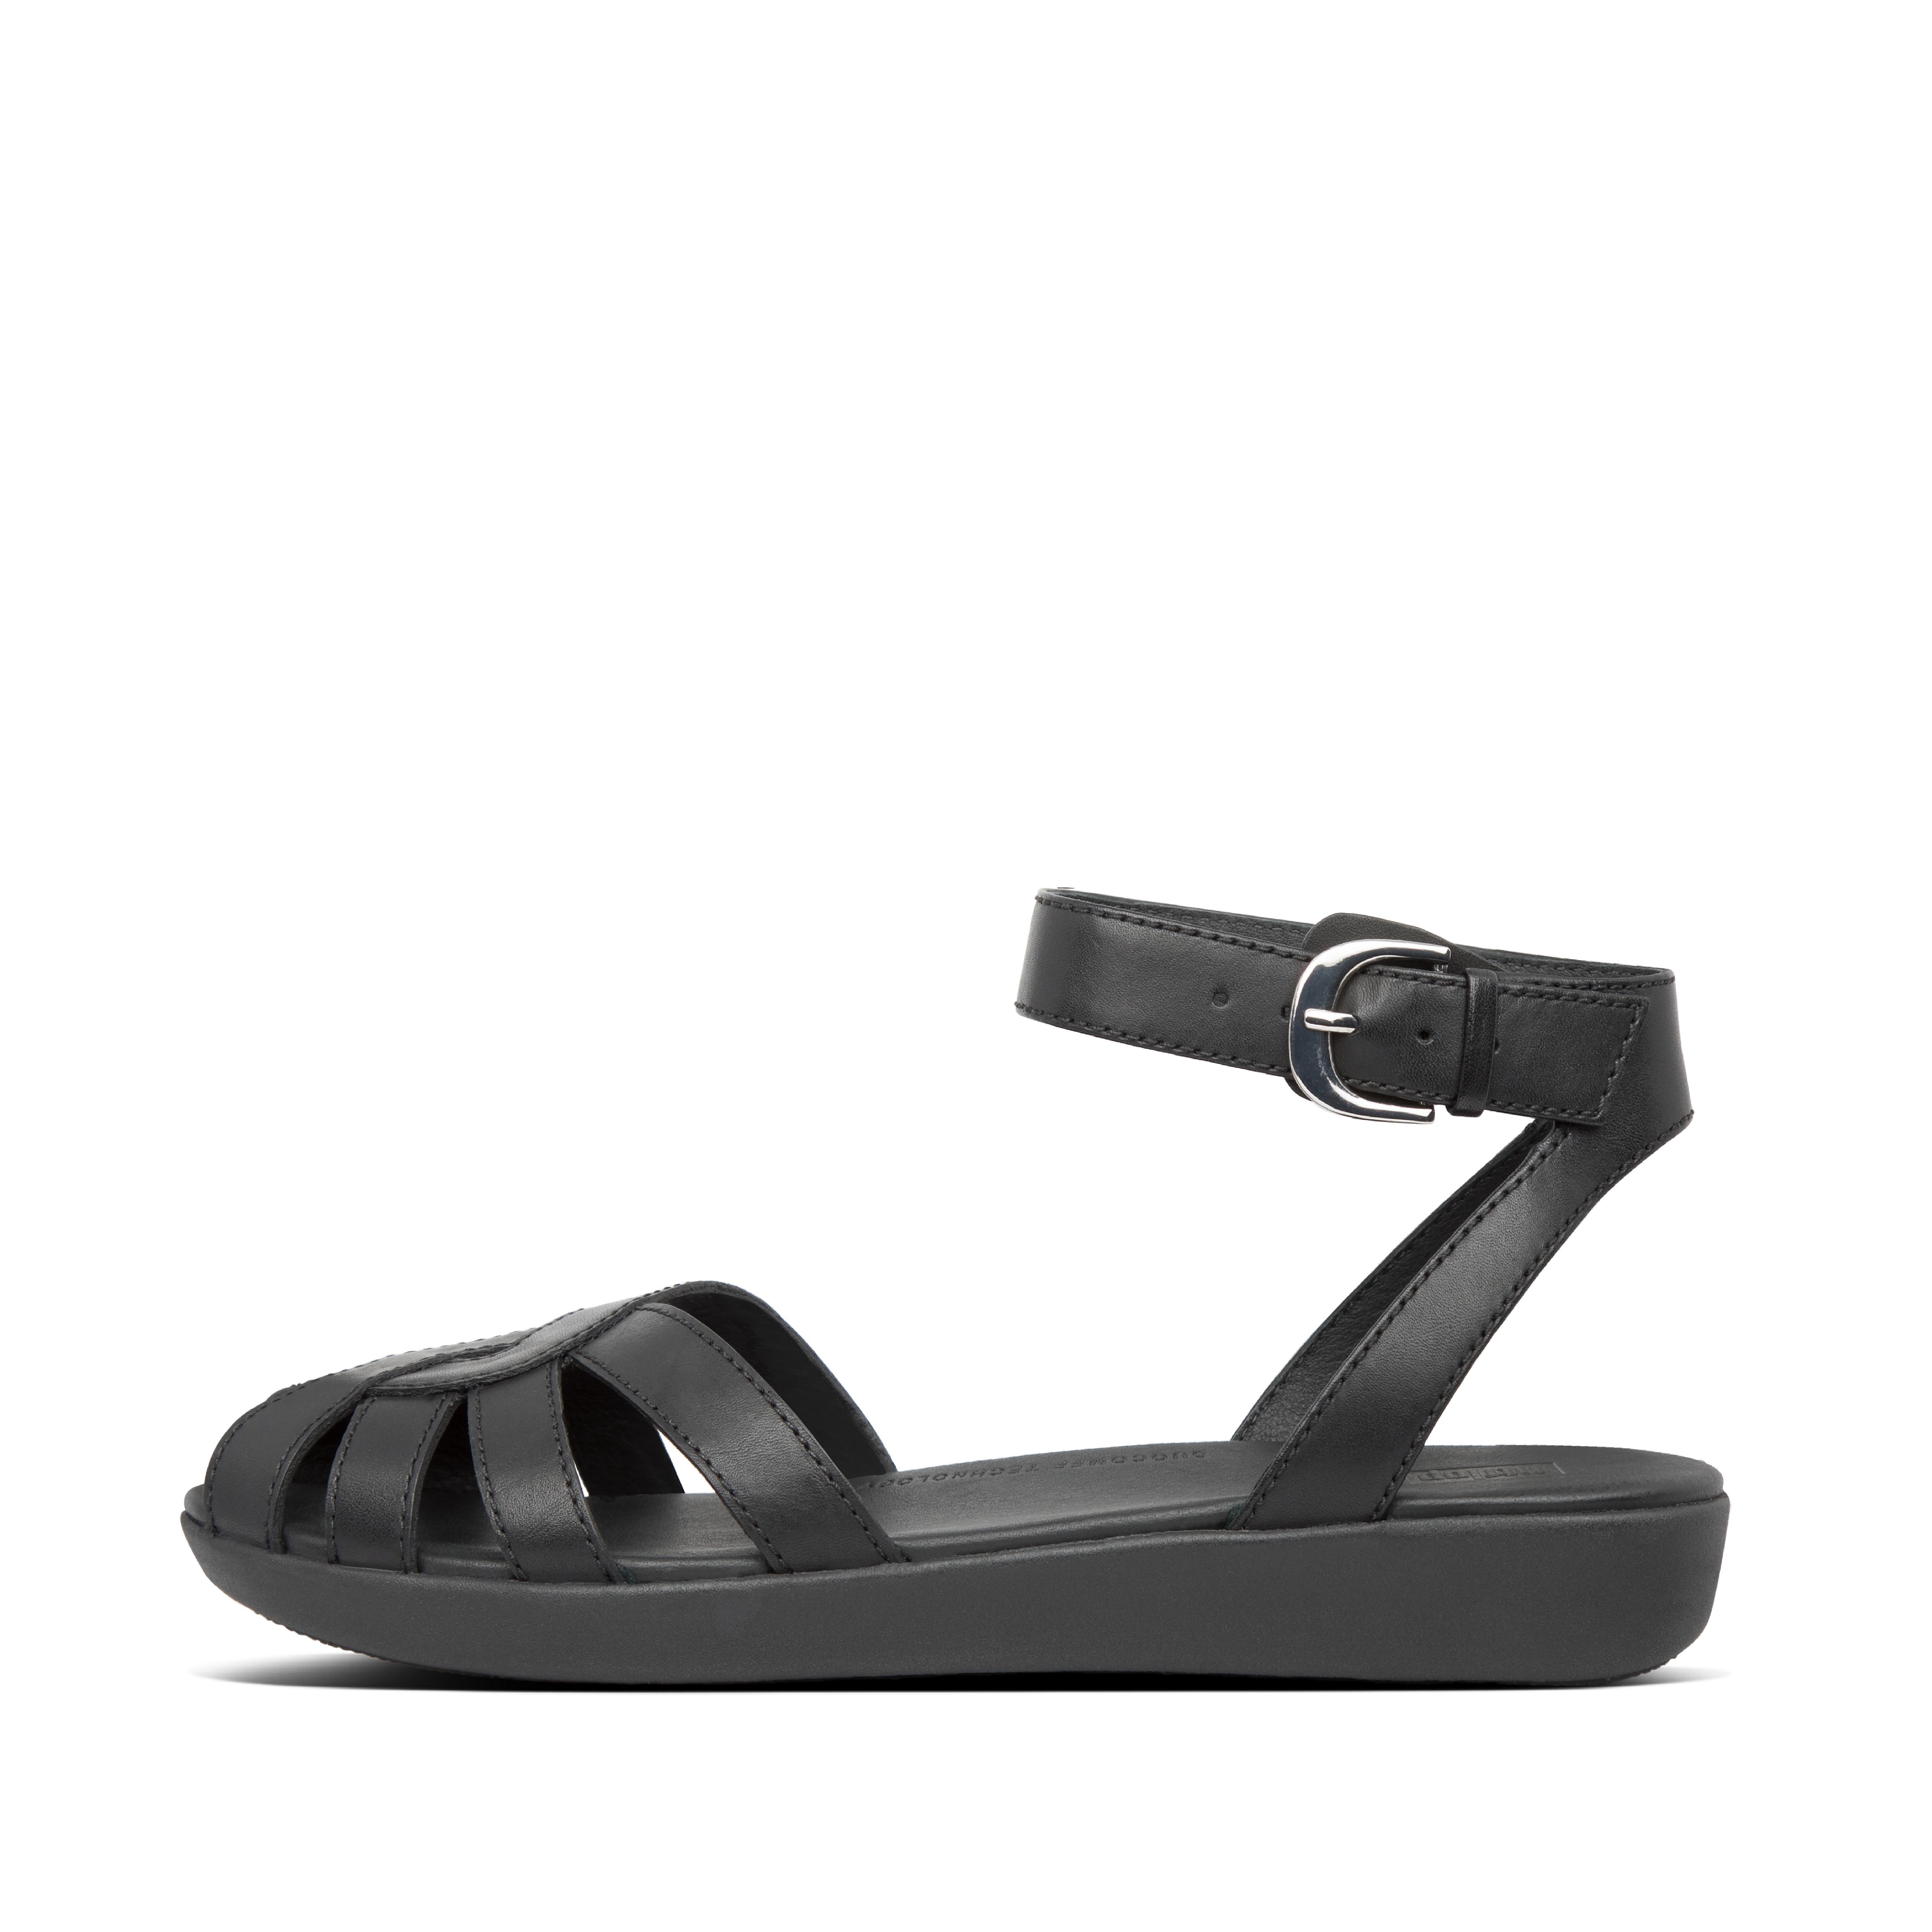 covered toe sandals women's